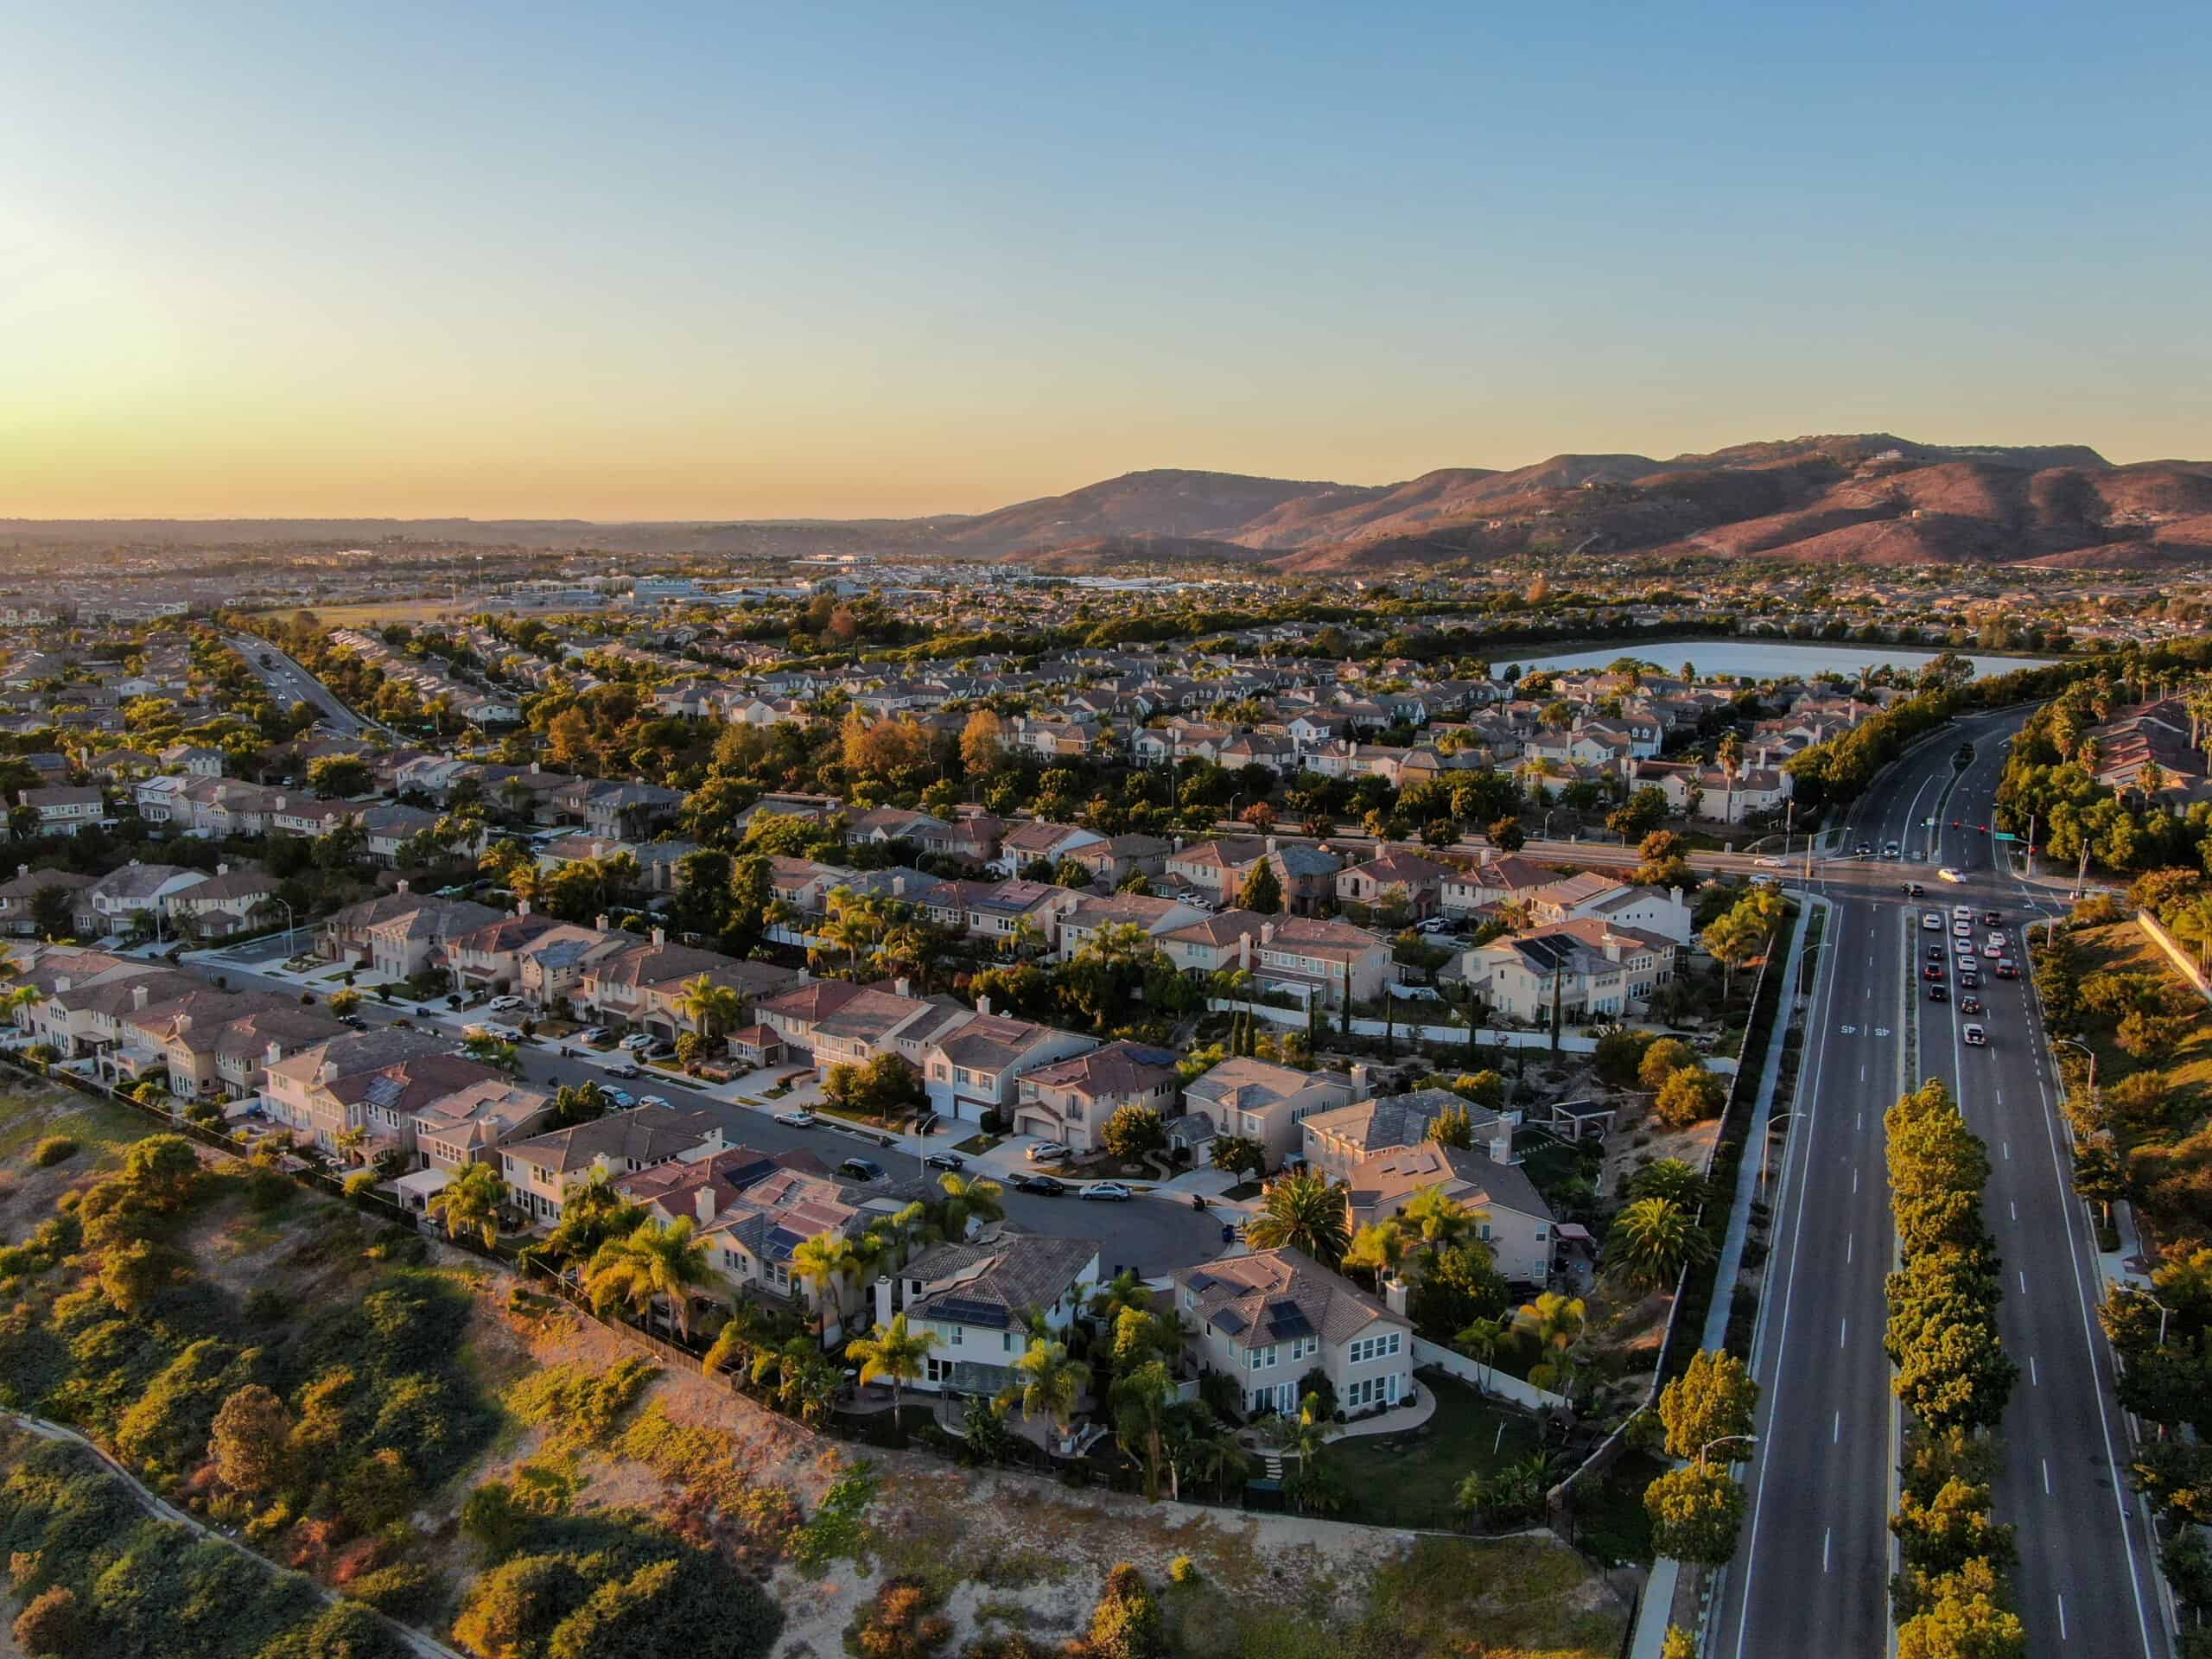 residential-modern-subdivision-house-neighborhood-with-mountain-background-during-sunset-scaled-1